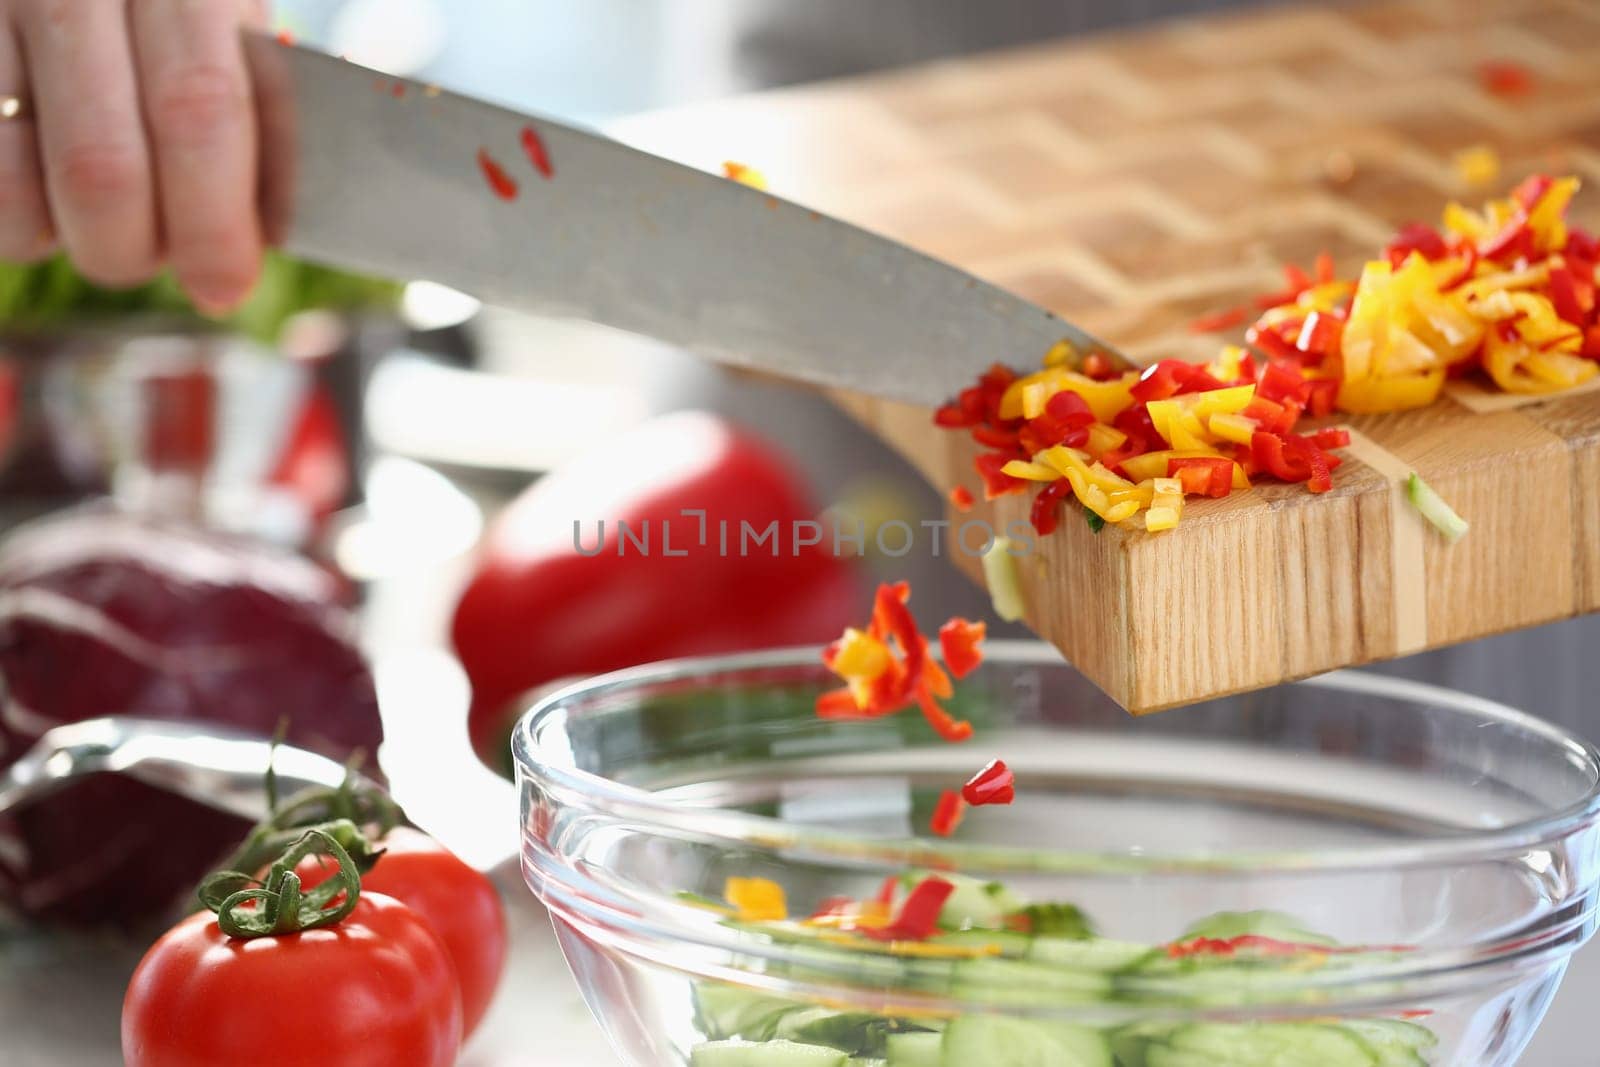 Cook adds chopped red yellow pepper to salad by kuprevich